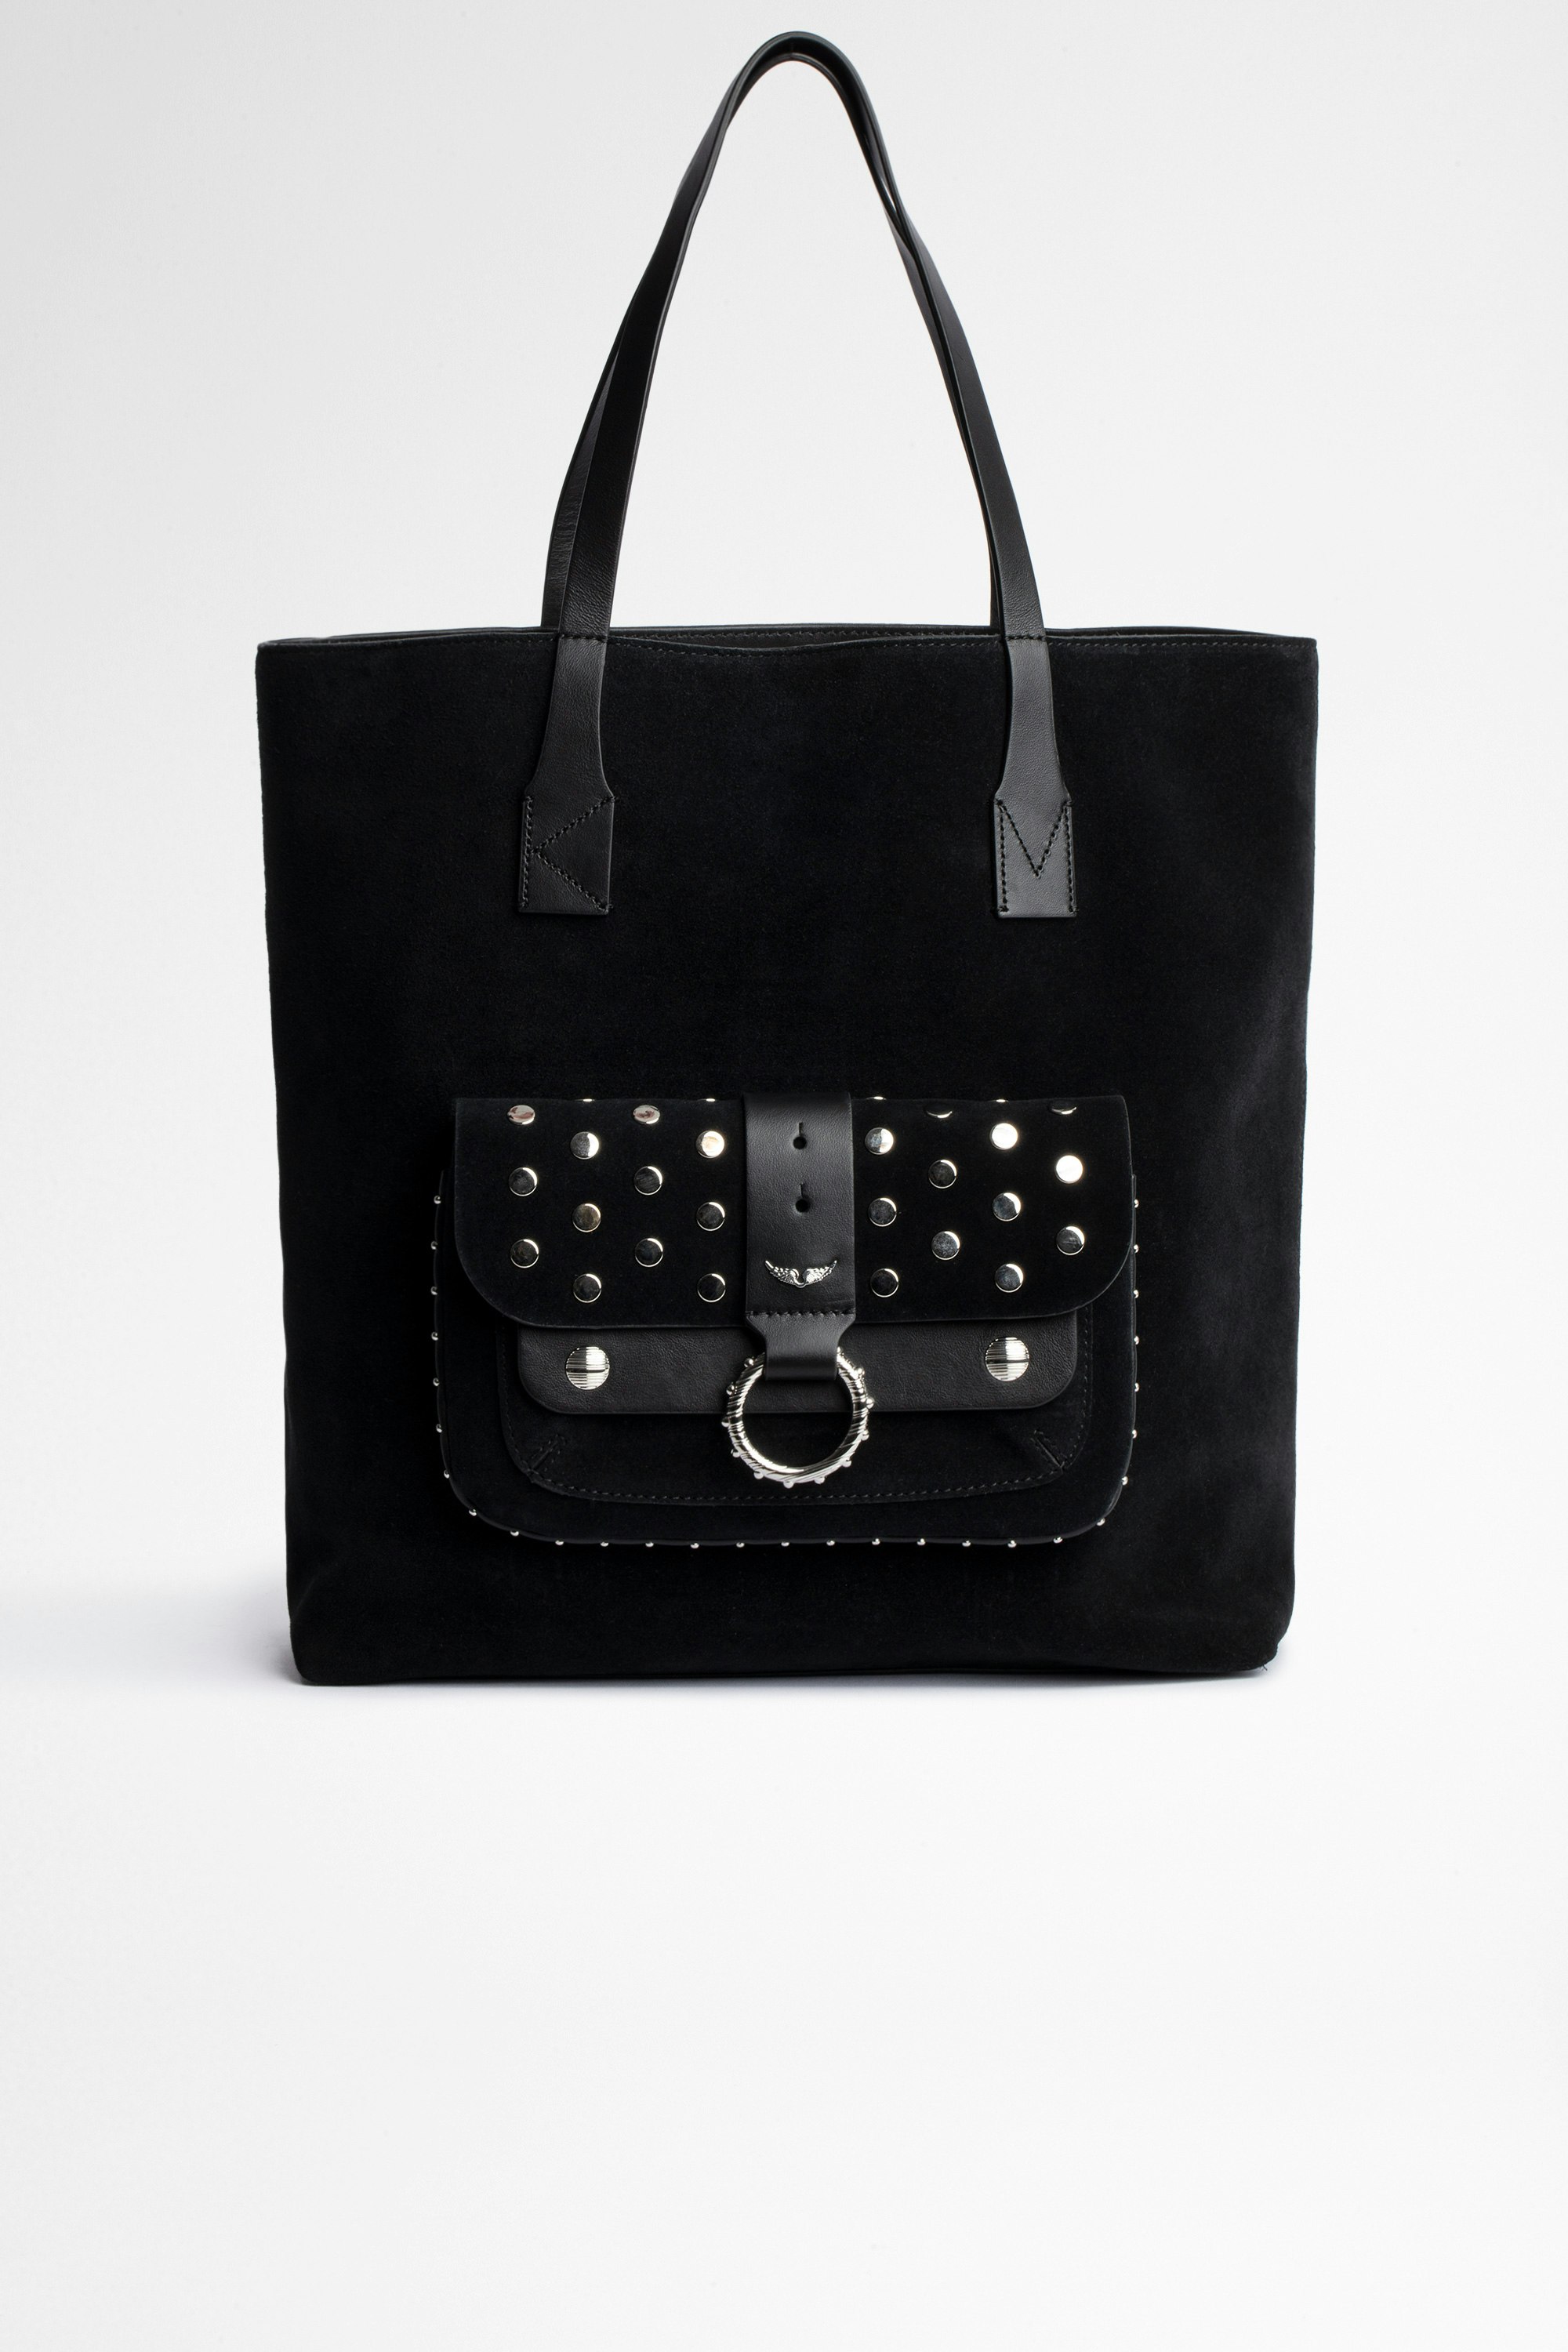 Kate Shopper Bag Black leather shopping bag. Buying this product, you support a responsible leather production through Leather Working Group.